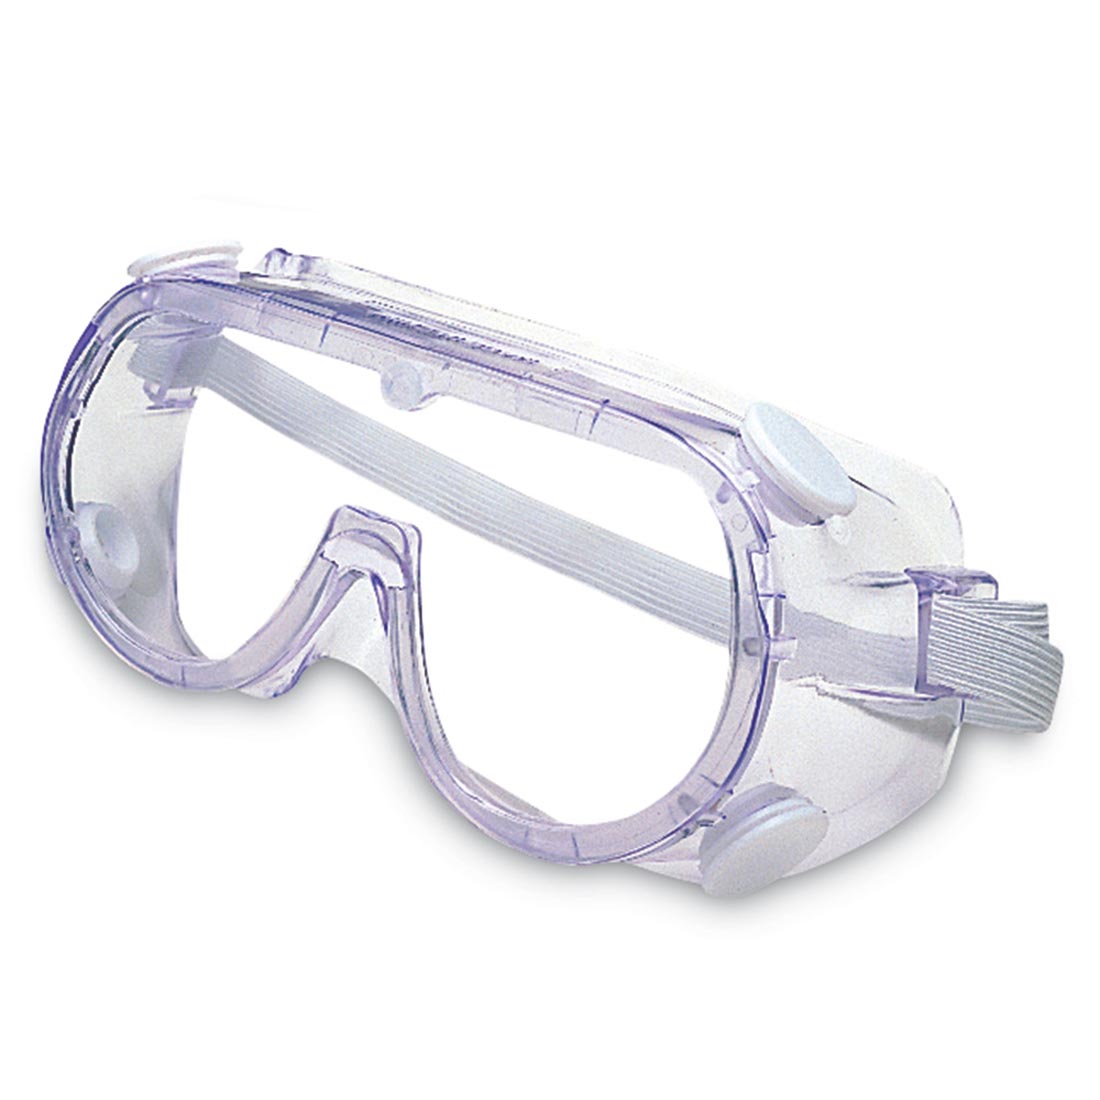 Safety Goggles with White Elastic Straps